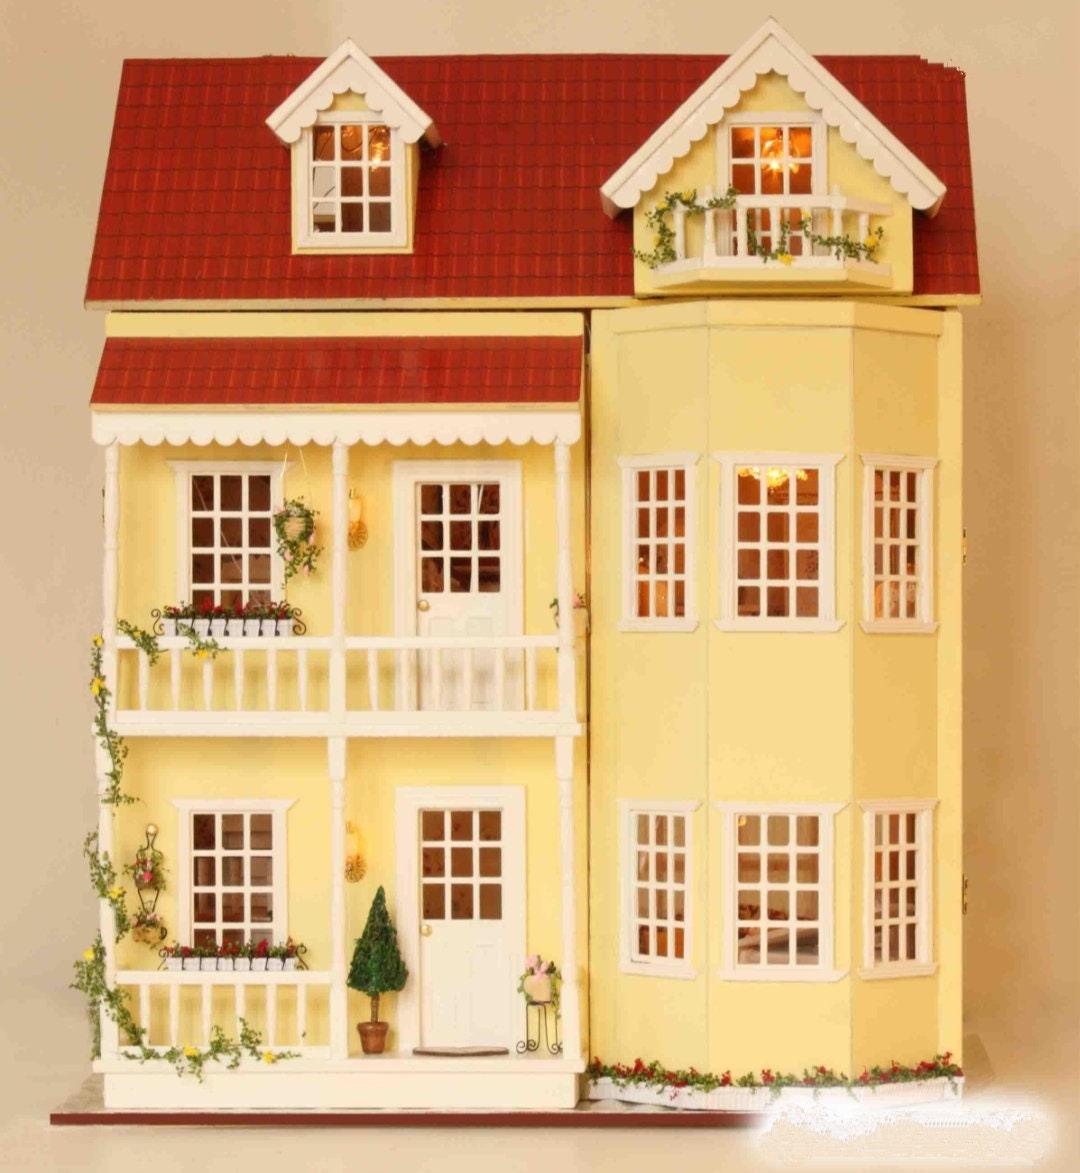 Modern Dollhouse Miniature with Furniture European Style DIY Dollhouse Kit - Openable Doors Room Large Dollhouse Free Musical Movement Box